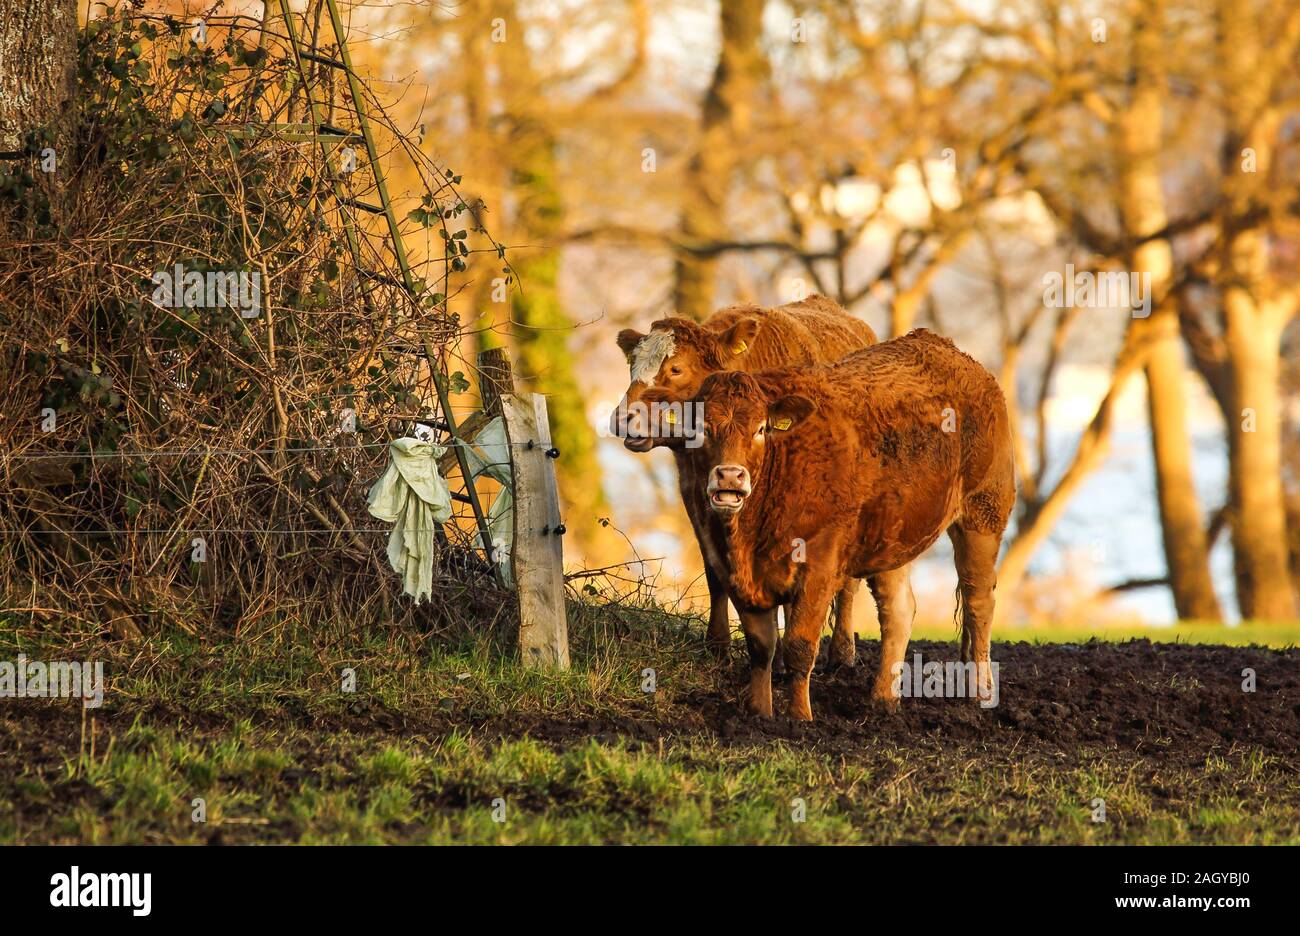 The two cows stood in the meadow and it almost seemed as if they were saying hello. Stock Photo